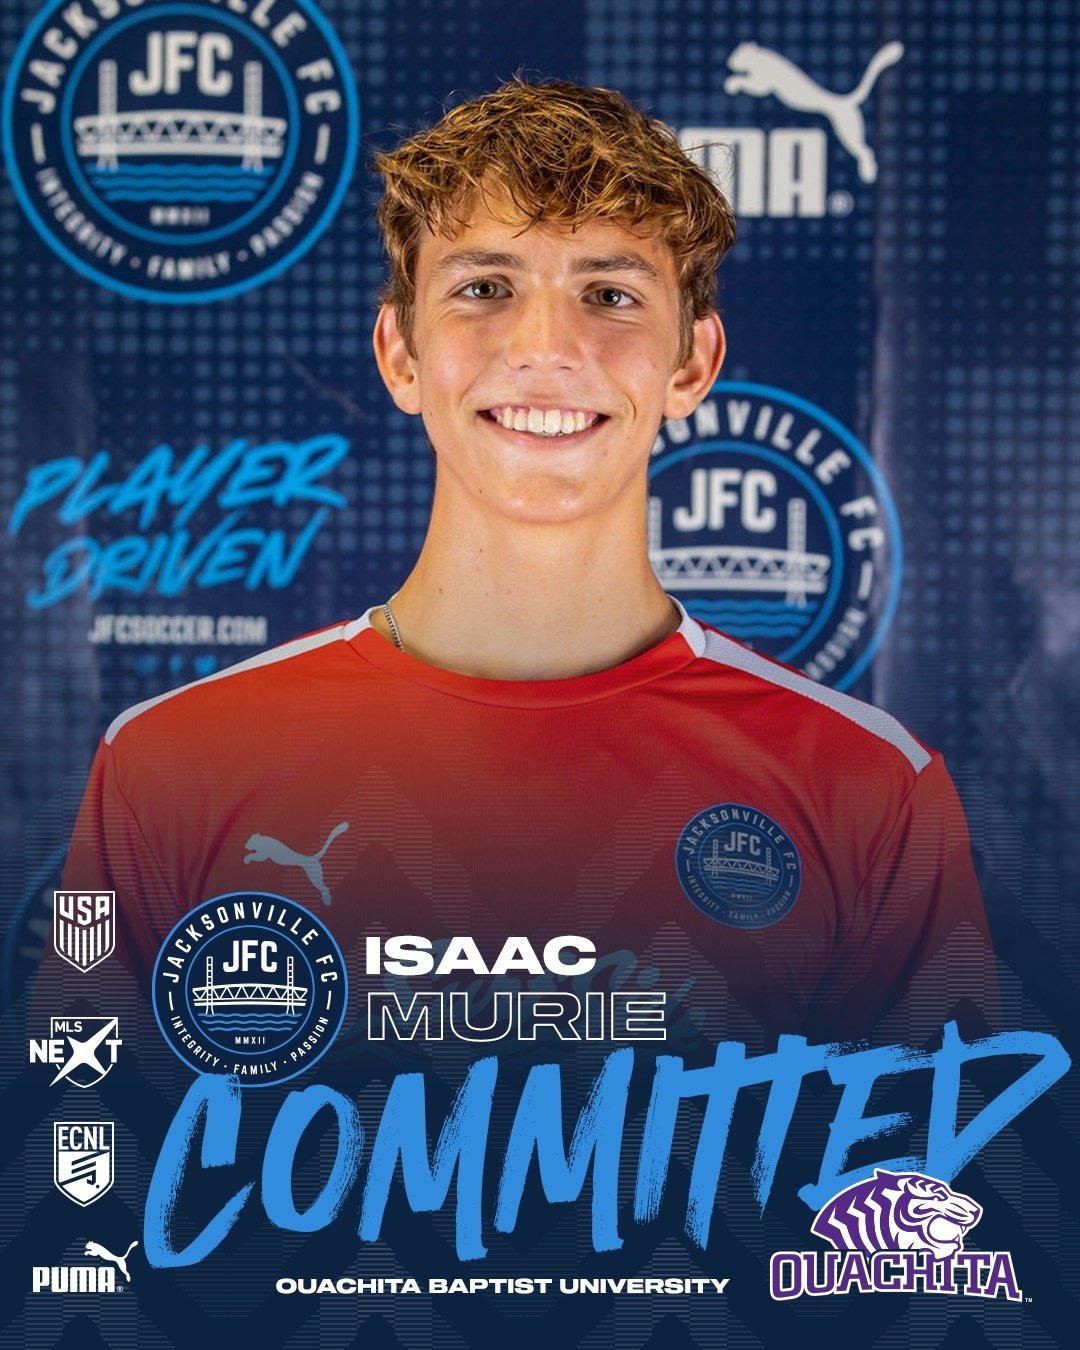 Congratulations to Isaac Murie on his commitment to play college soccer for Ouachita Baptist University. Well done Isaac and good luck at the next level, we are proud of you.

#PlayerDriven #904JFC